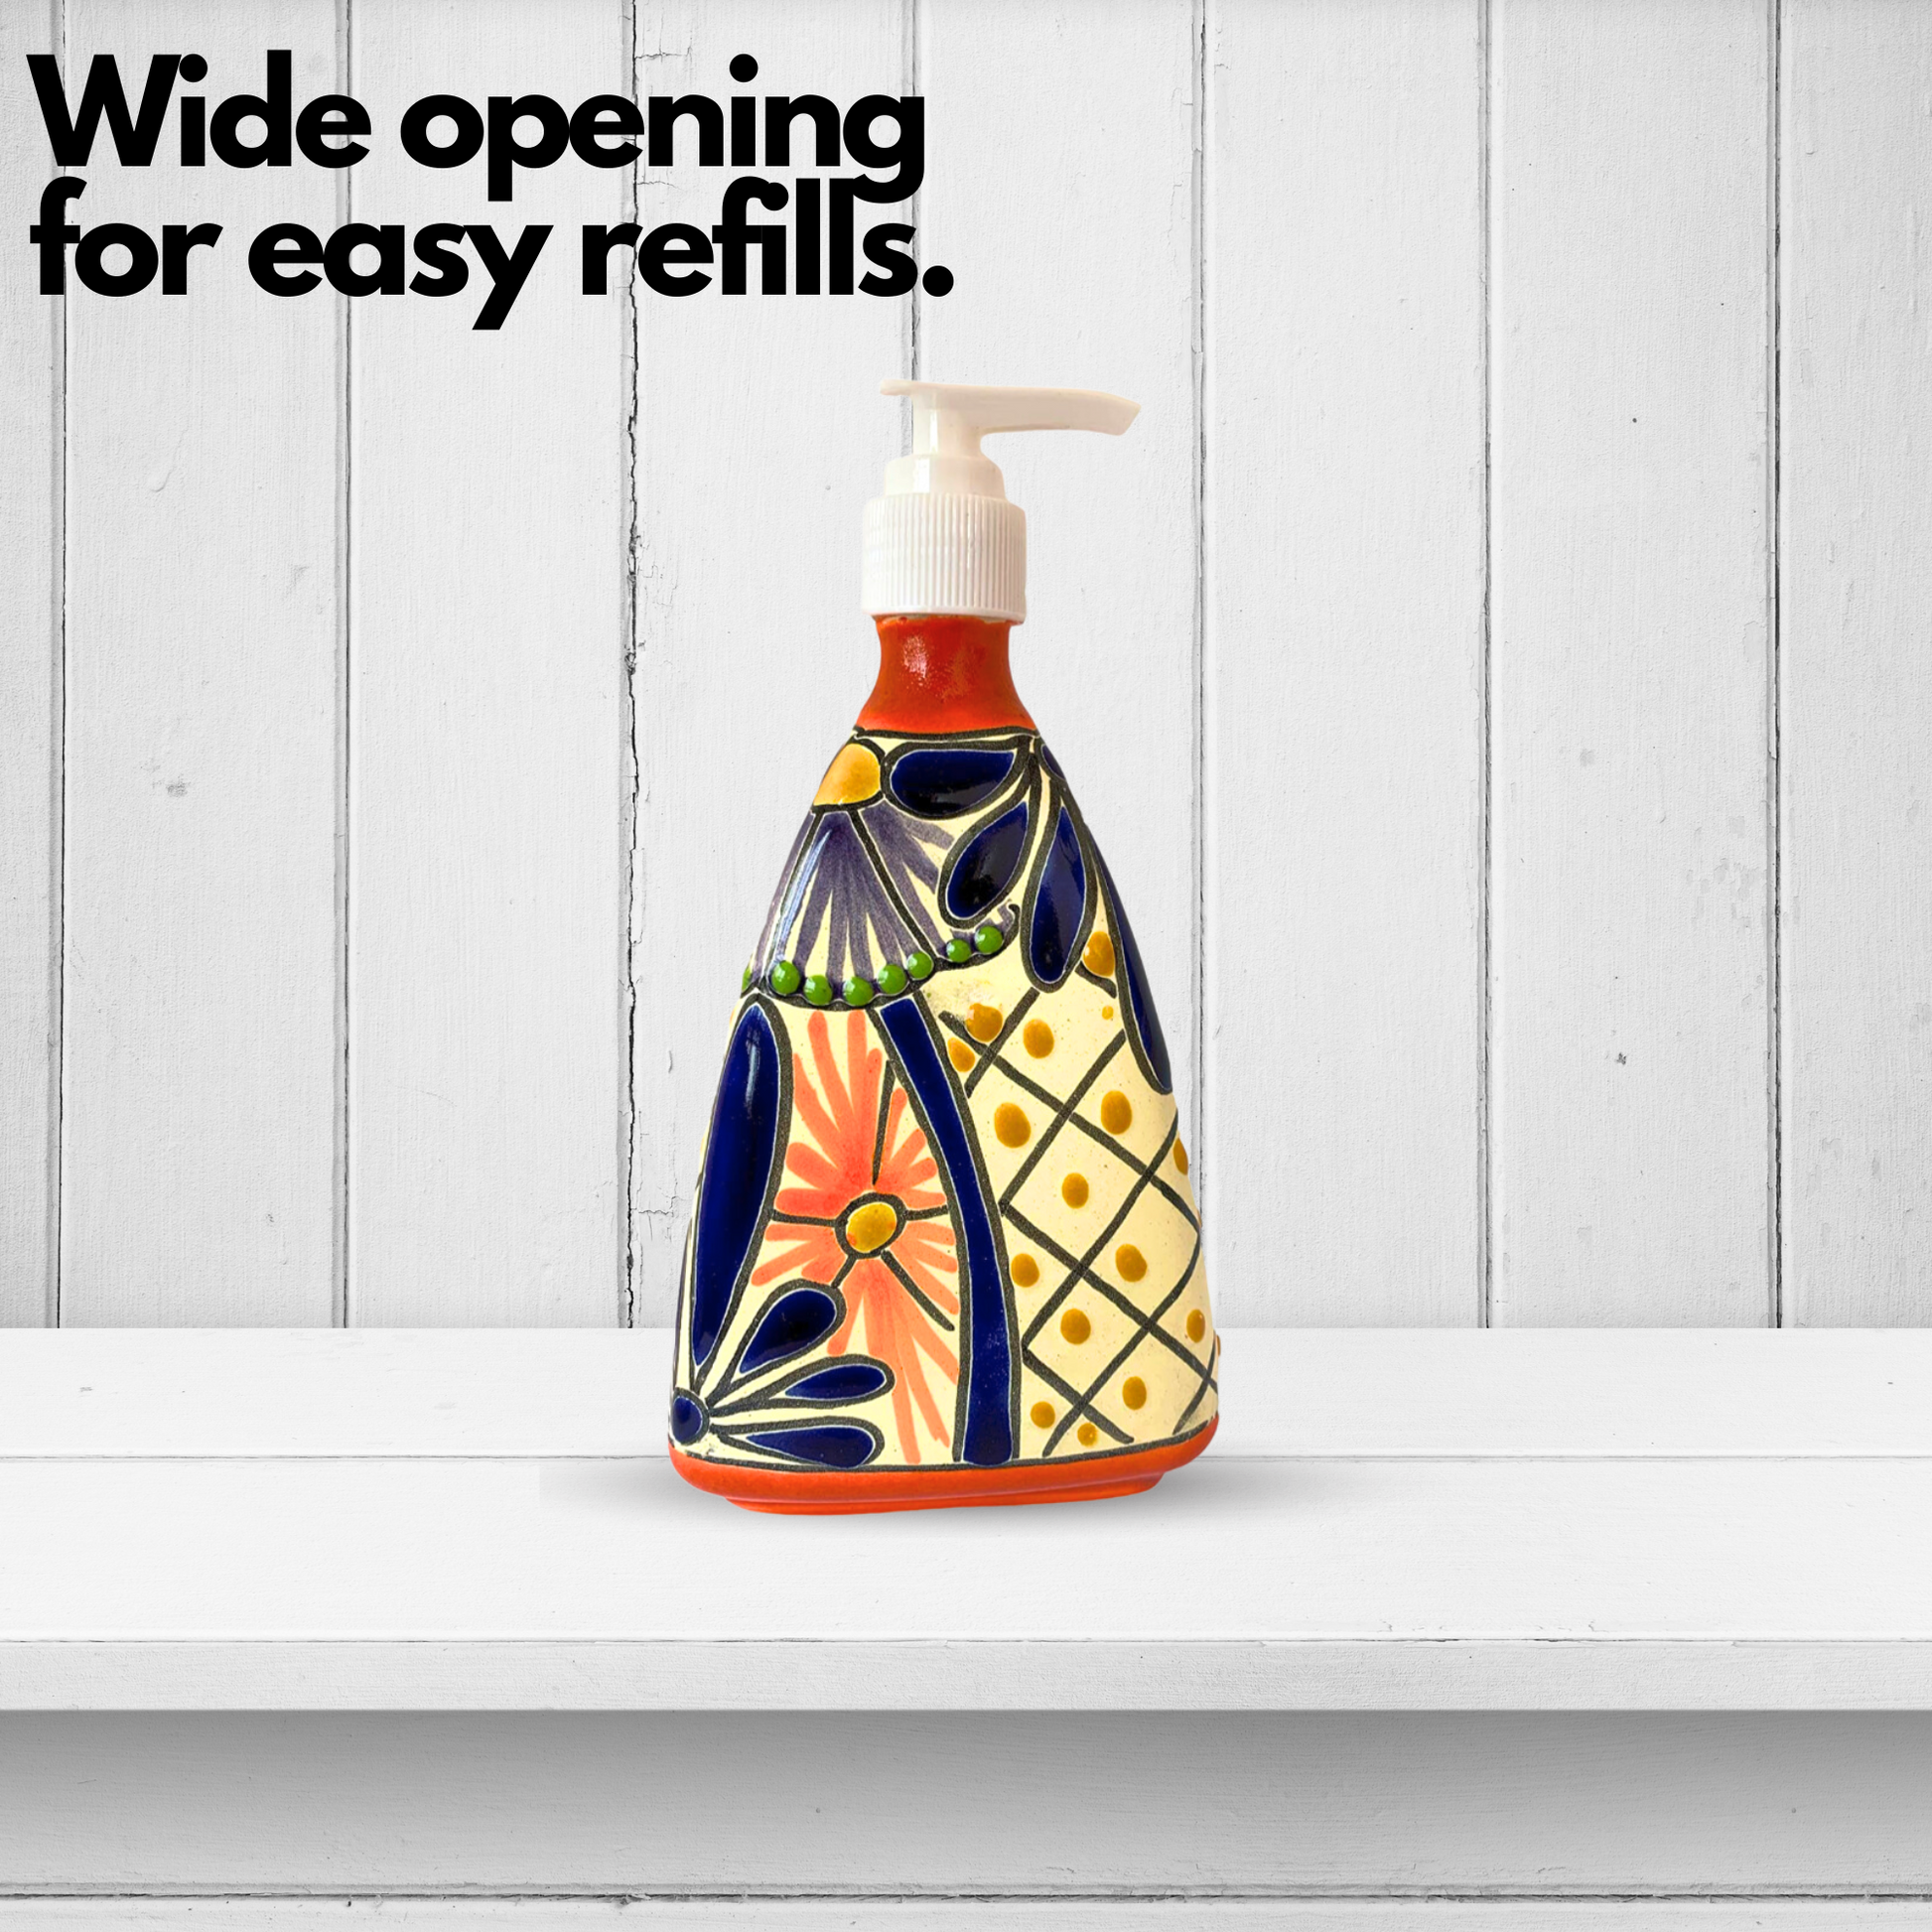 Wide opening for easy refills Pyramid-shaped Ceramic Soap Dispenser, hand-painted by Mexican artisans, perfect for adding a vibrant touch to kitchen or bathroom decor.